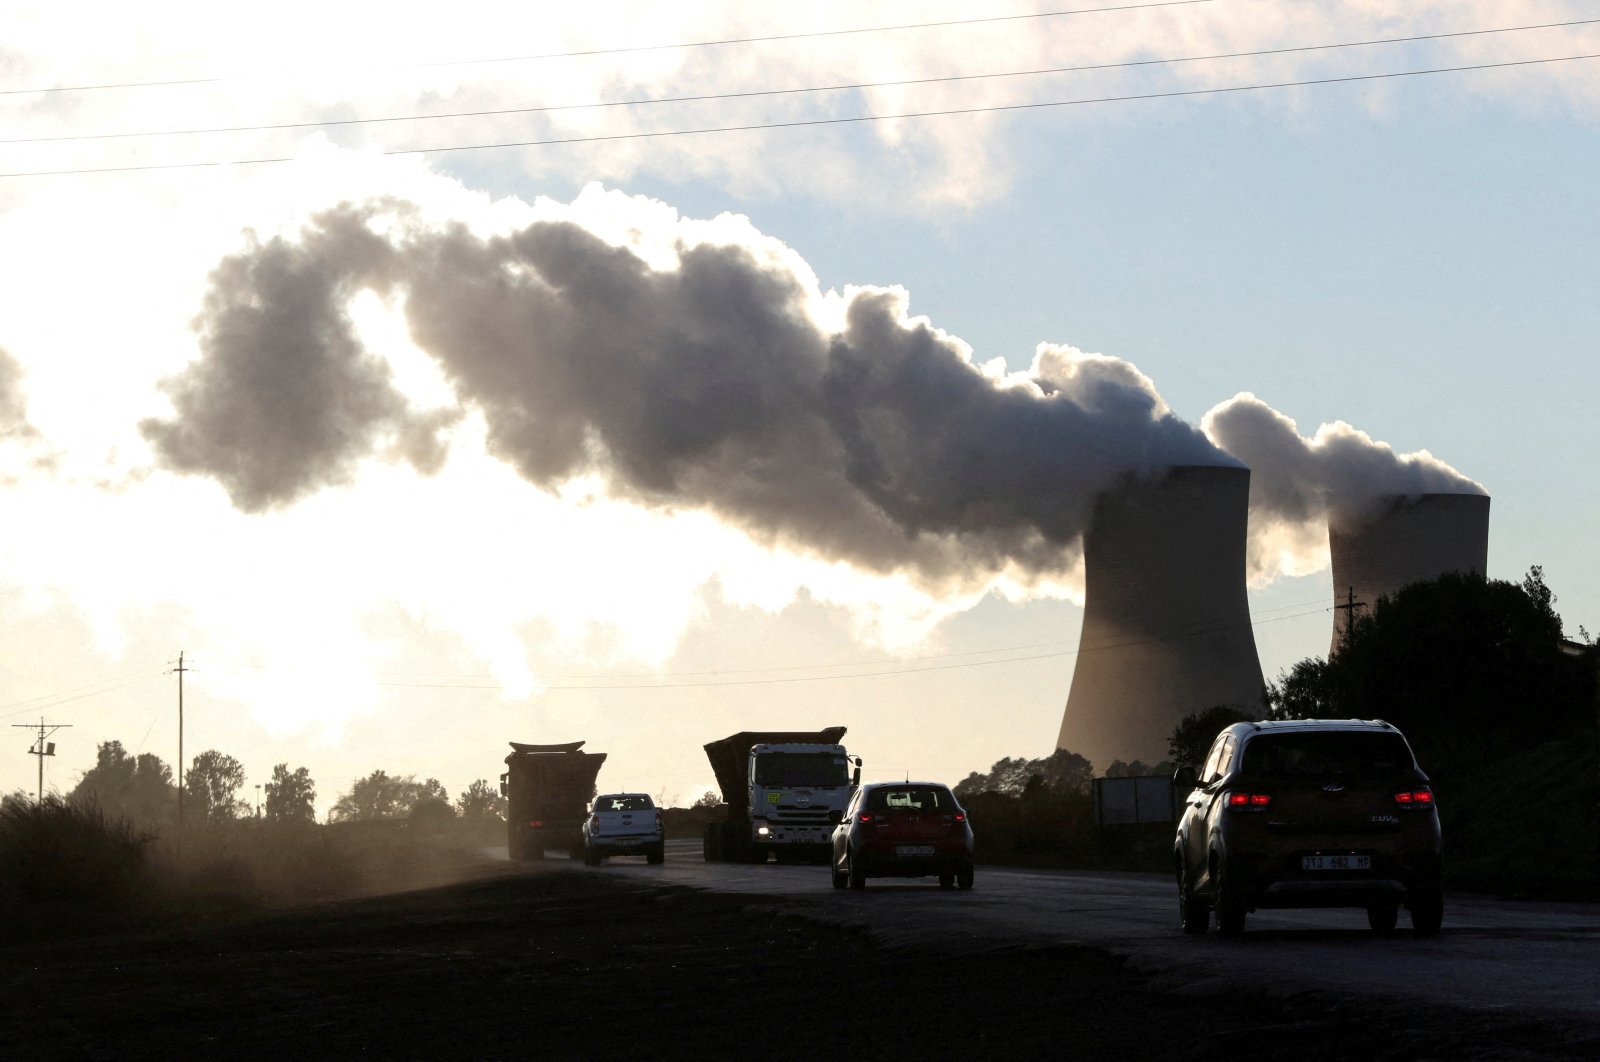 Trucks and cars are seen driving past while smoke rises from the coal-based power station owned by state power utility Eskom, in Emalahleni, Mpumalanga province, South Africa, June 3, 2021. (Reuters Photo)